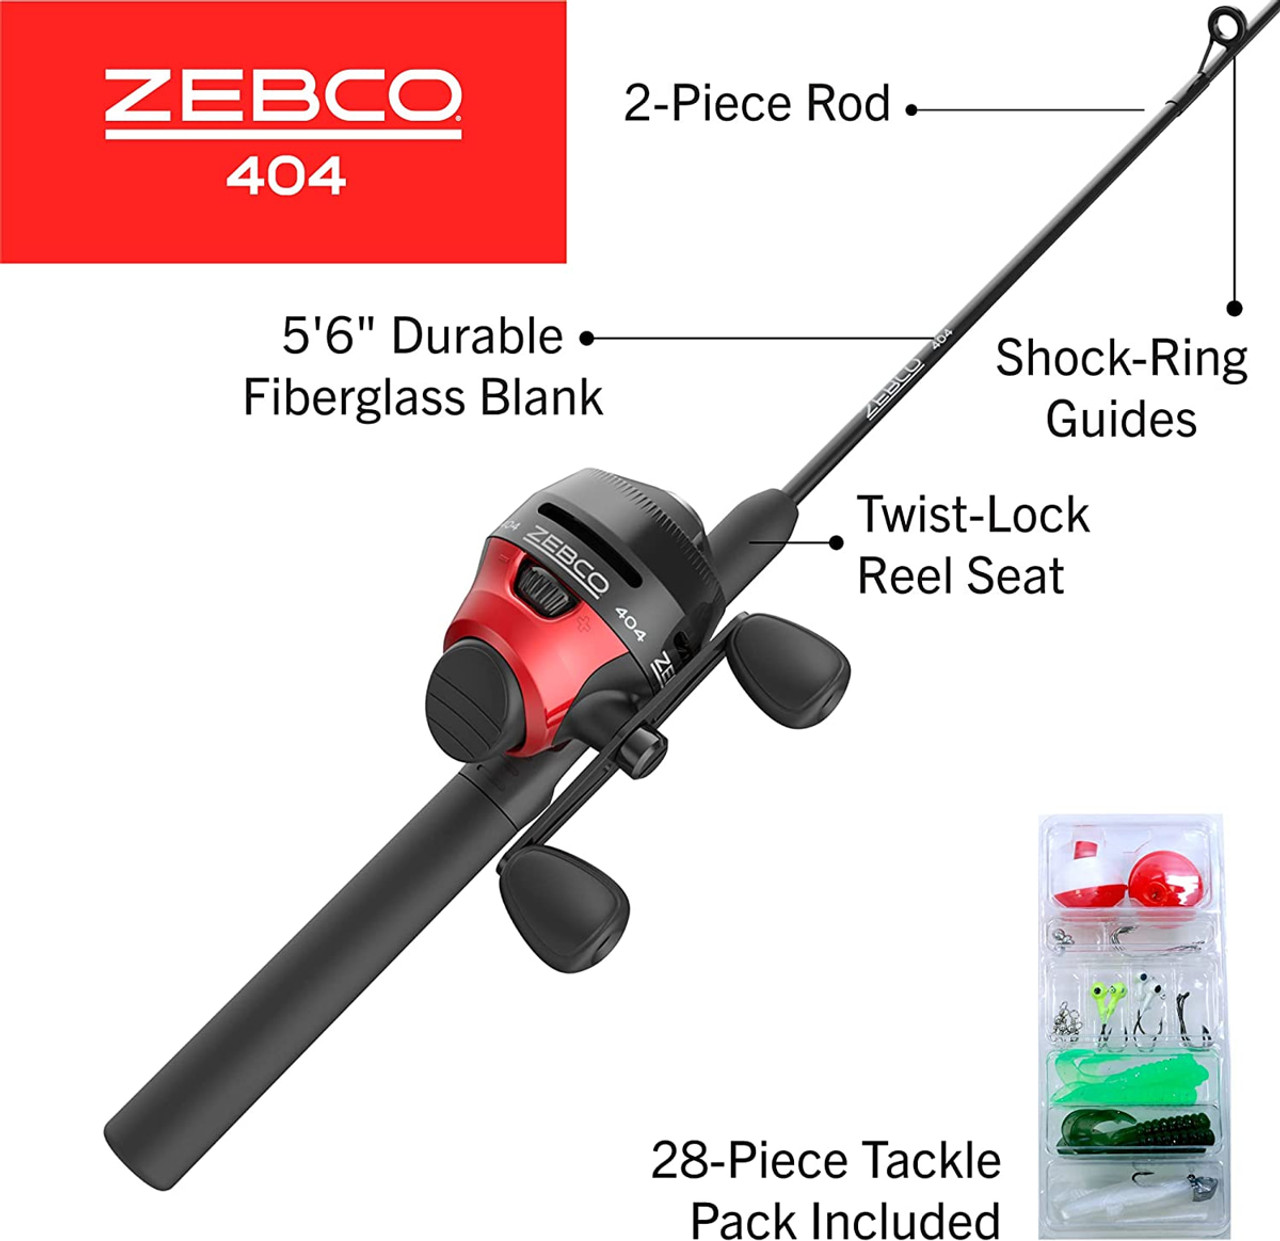 Zebco 404 Spincast Reel and 2-Piece Fishing Rod Combo, Durable